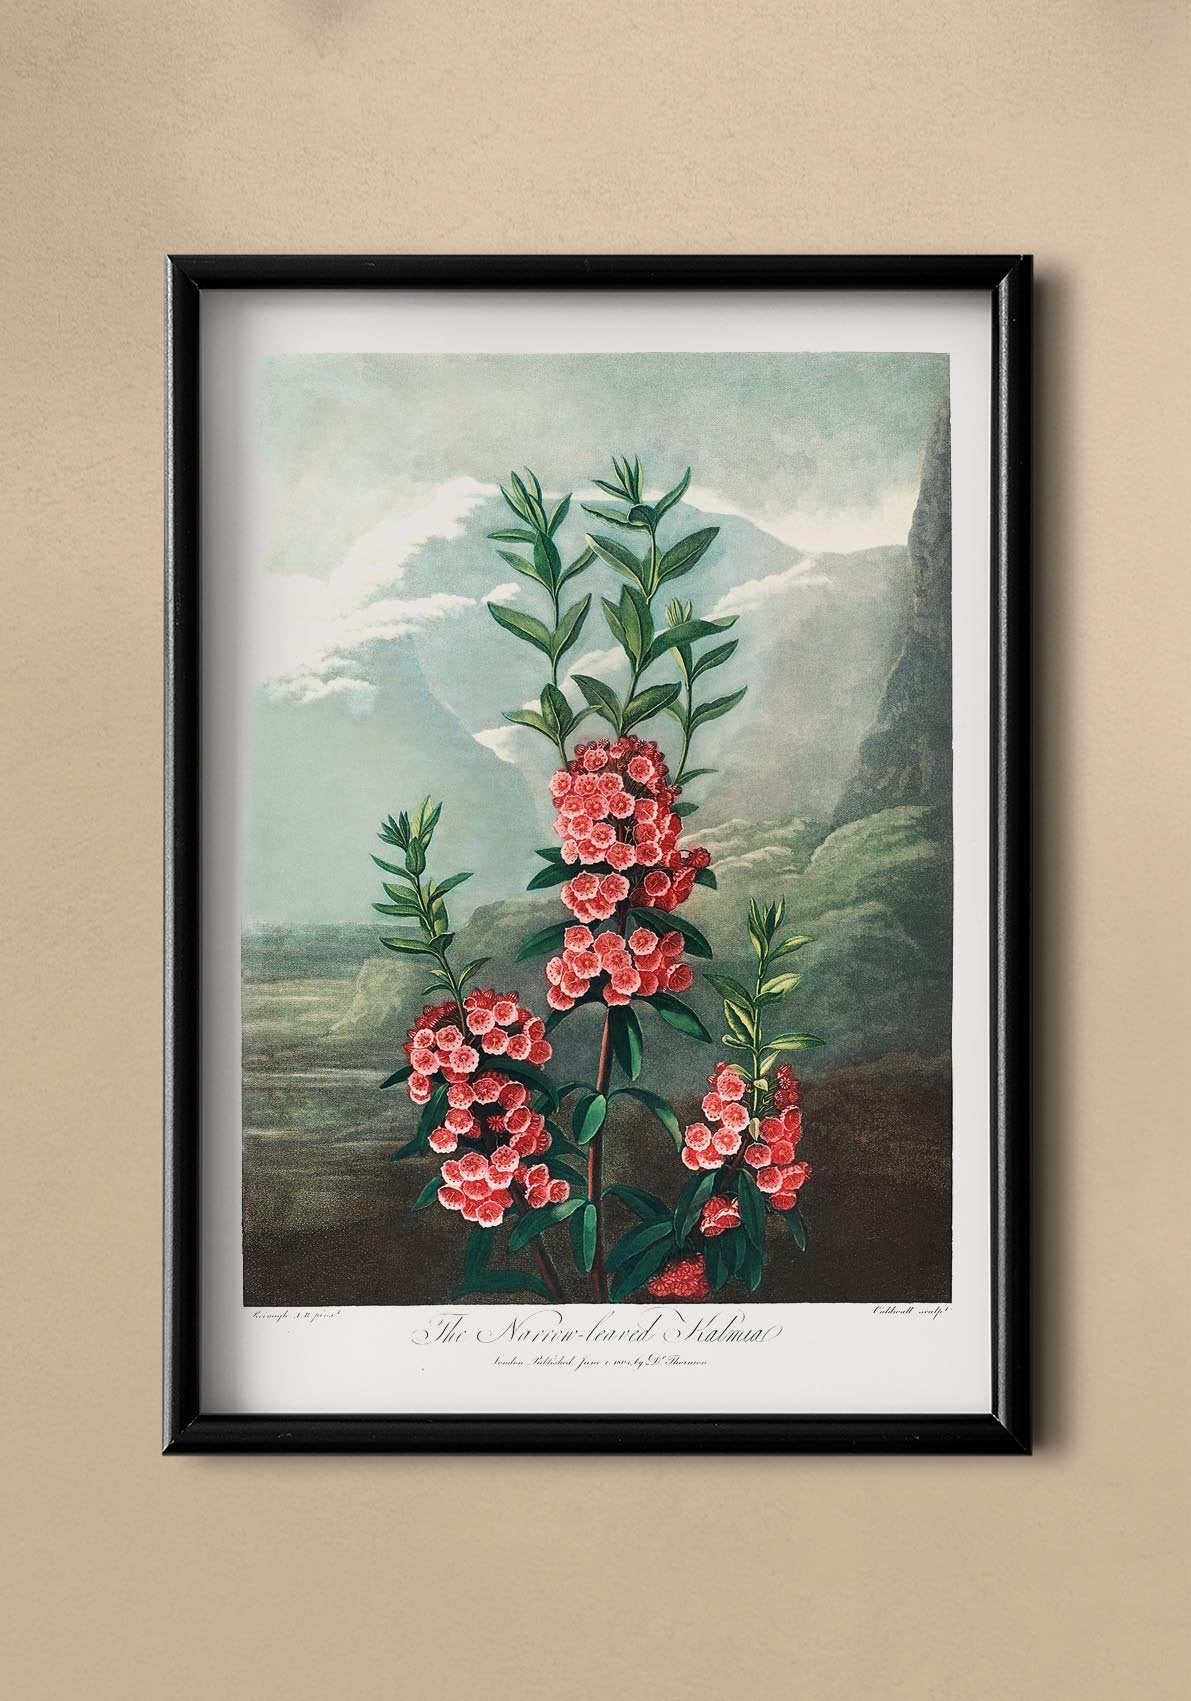 Kalmia Plant from The Temple of Flora